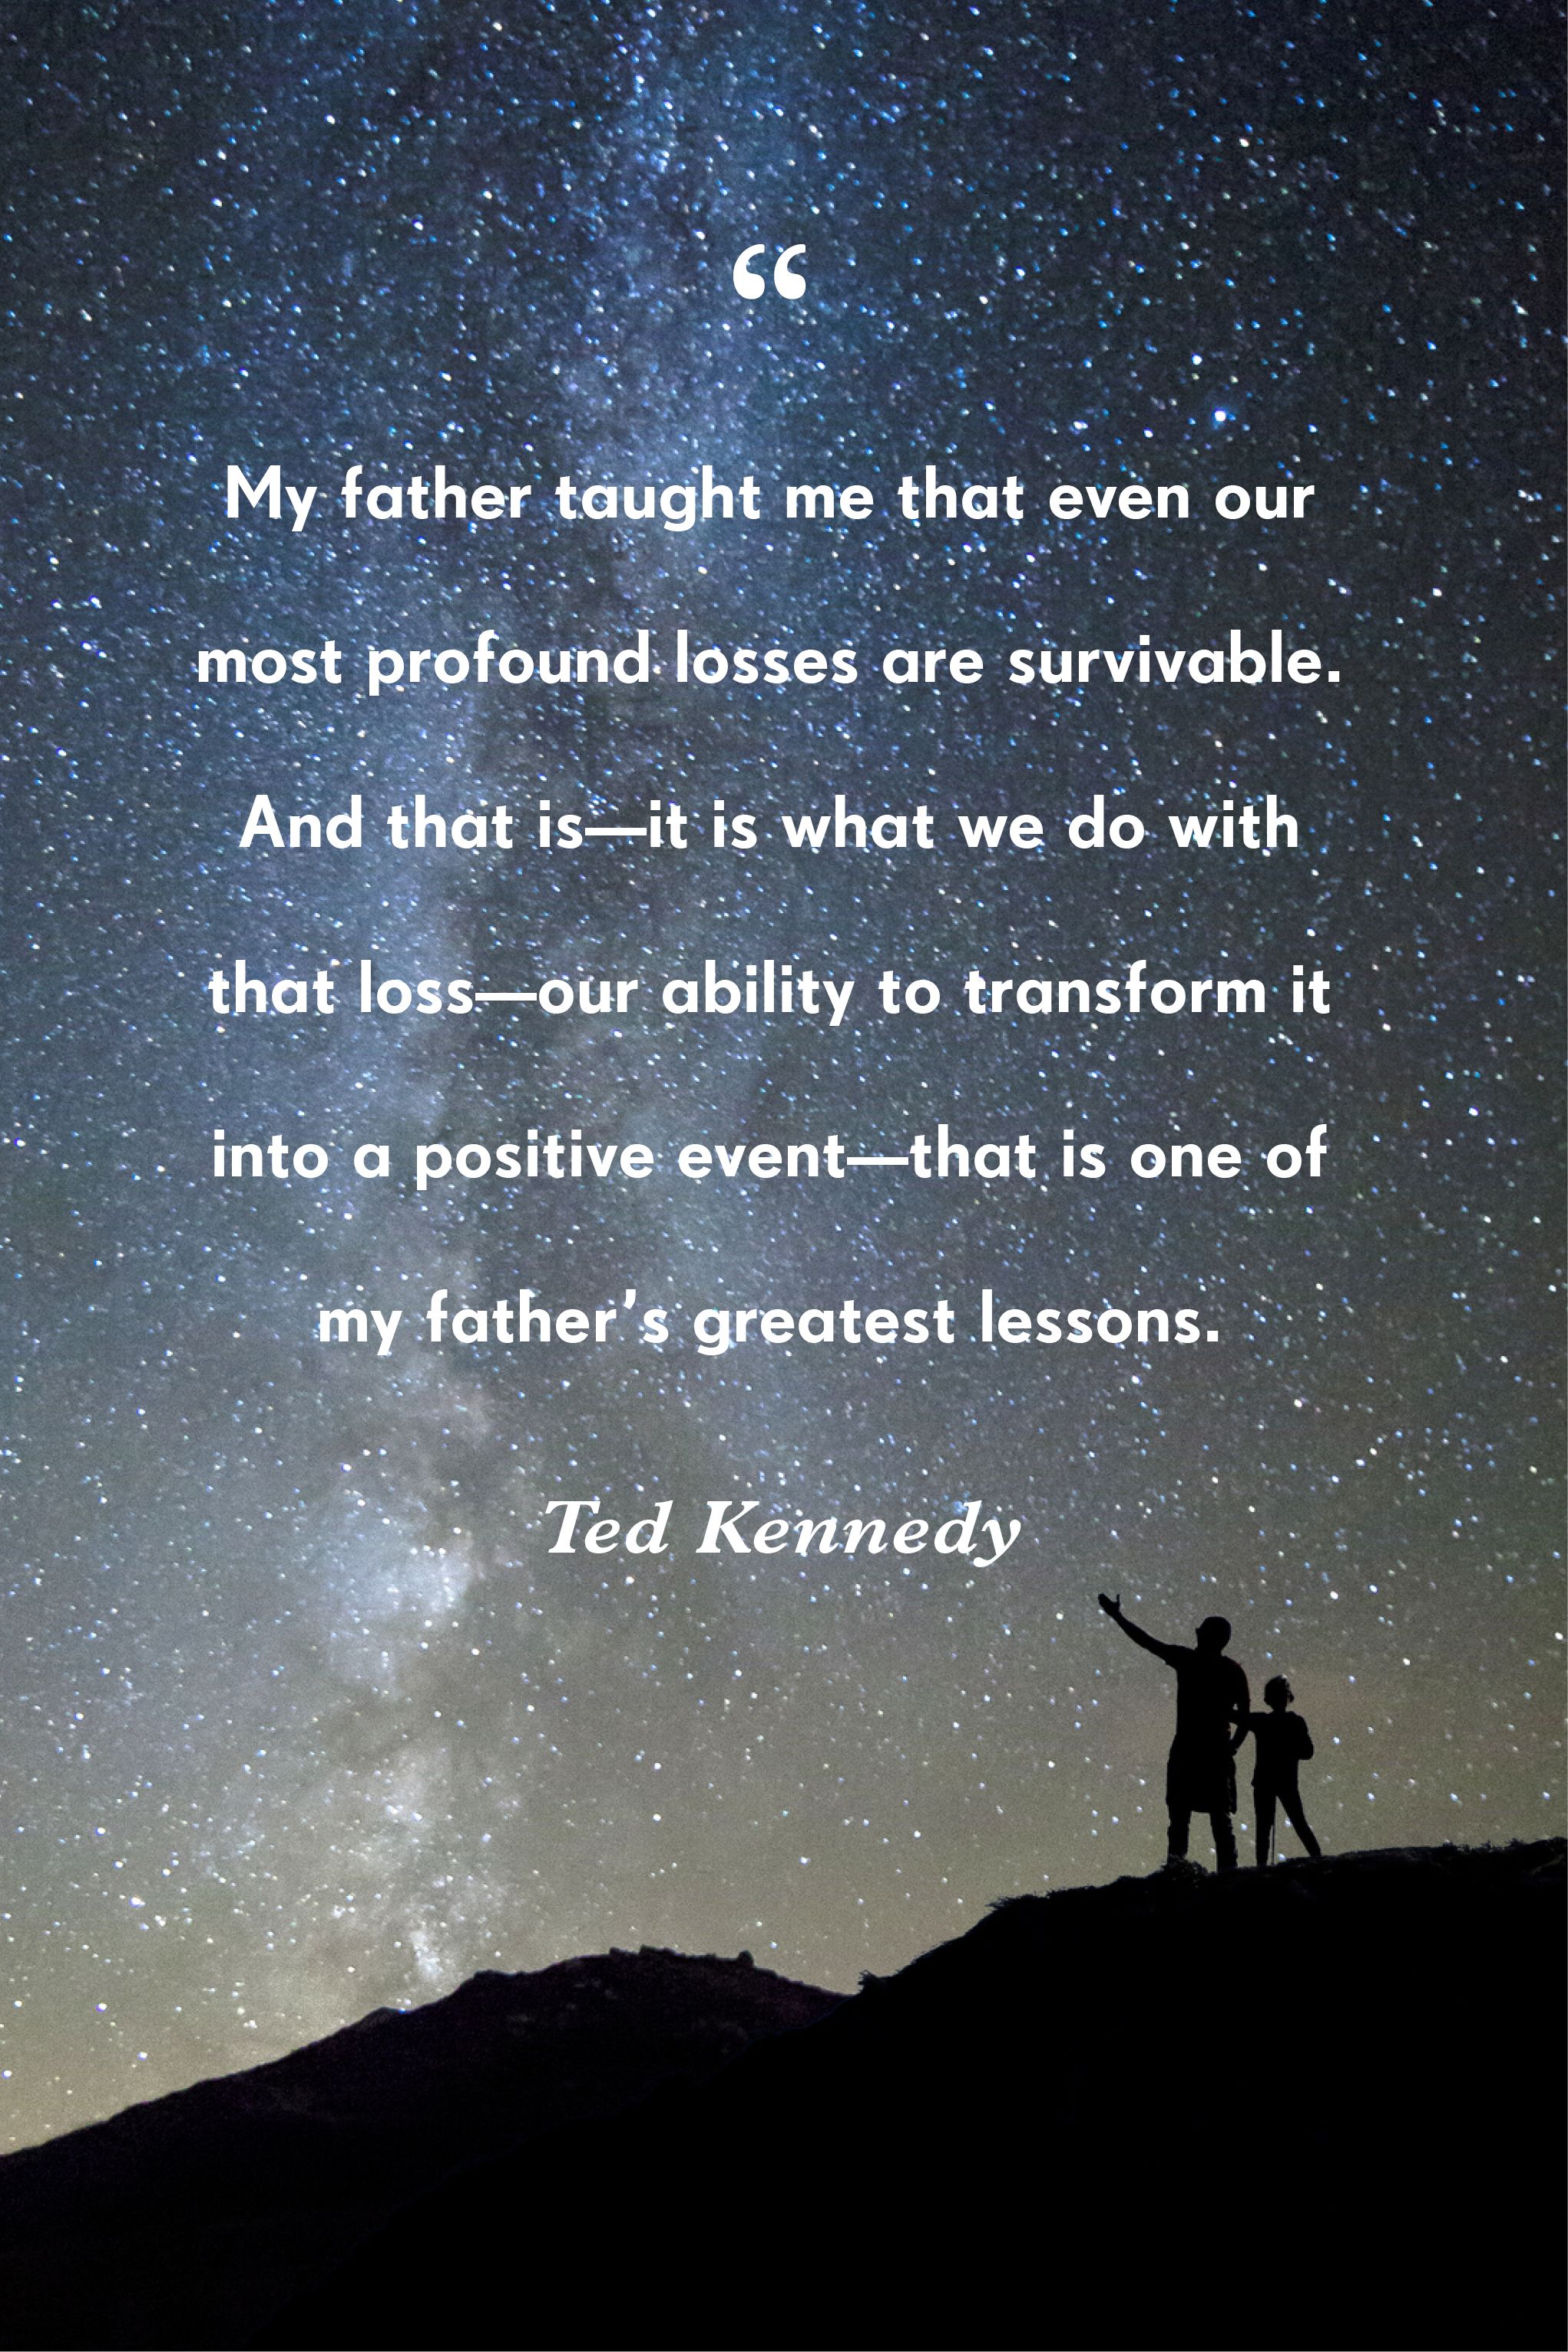 passed away quotes for dad